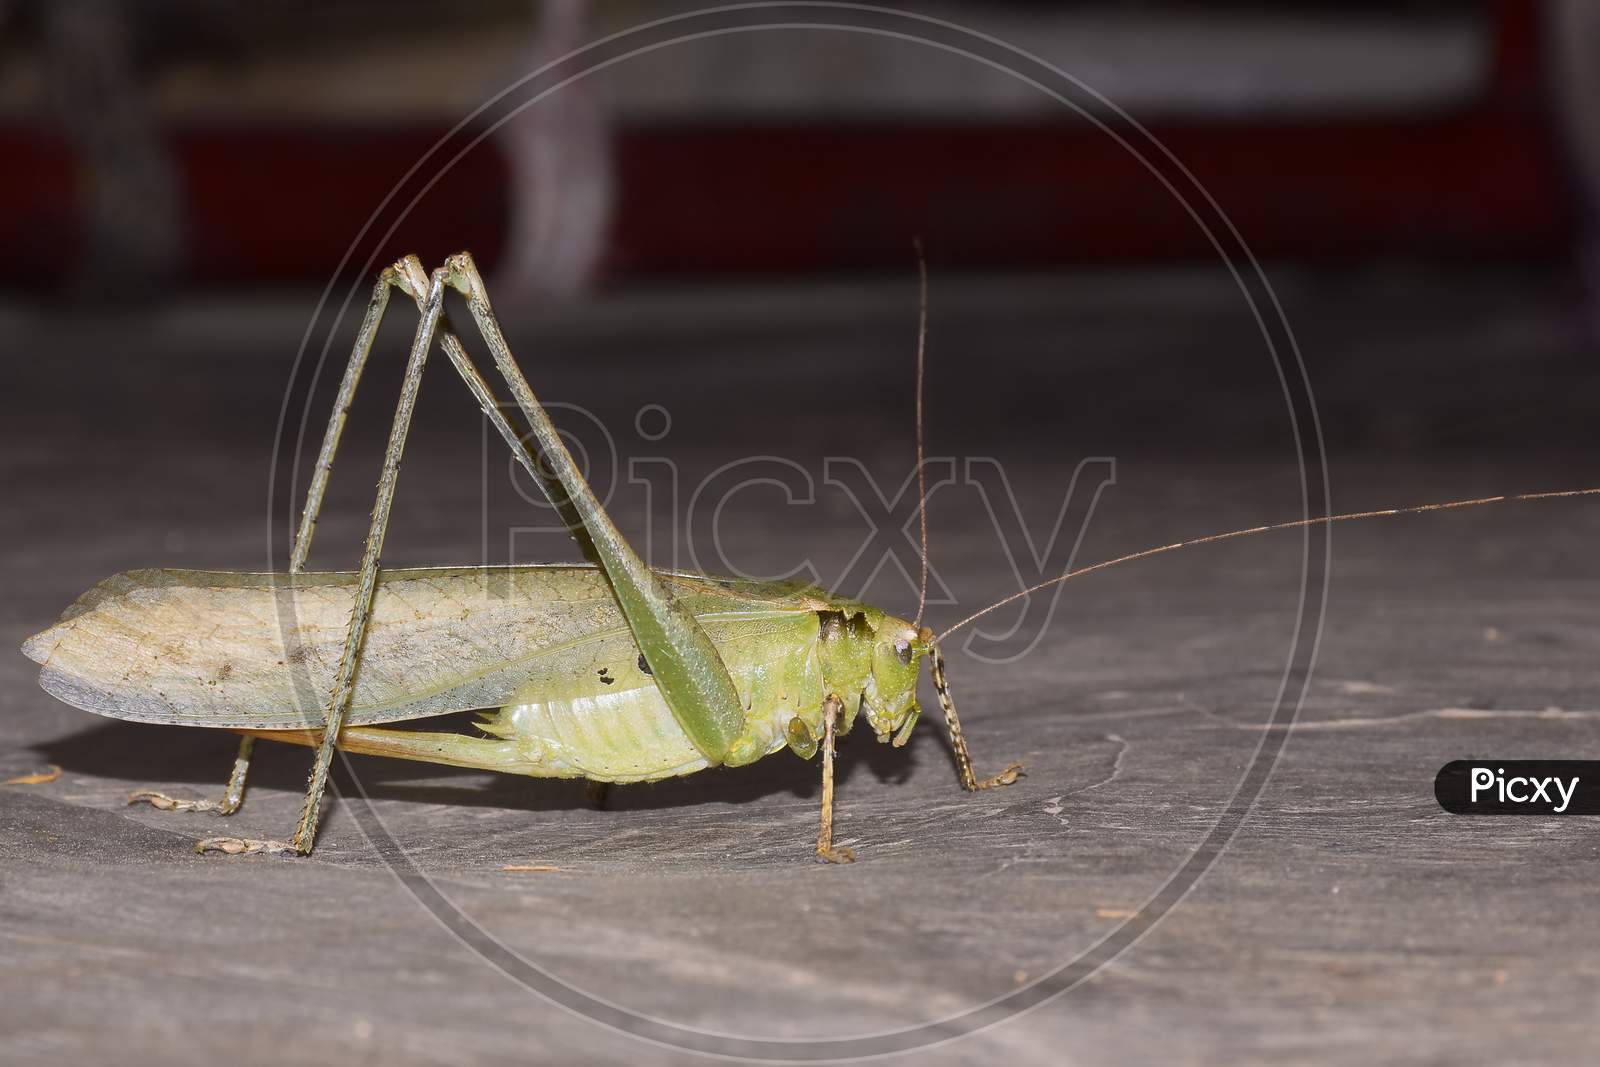 Close-Up Focus Stacked Image Of A Young Carolina Praying Mantis On The Floor.